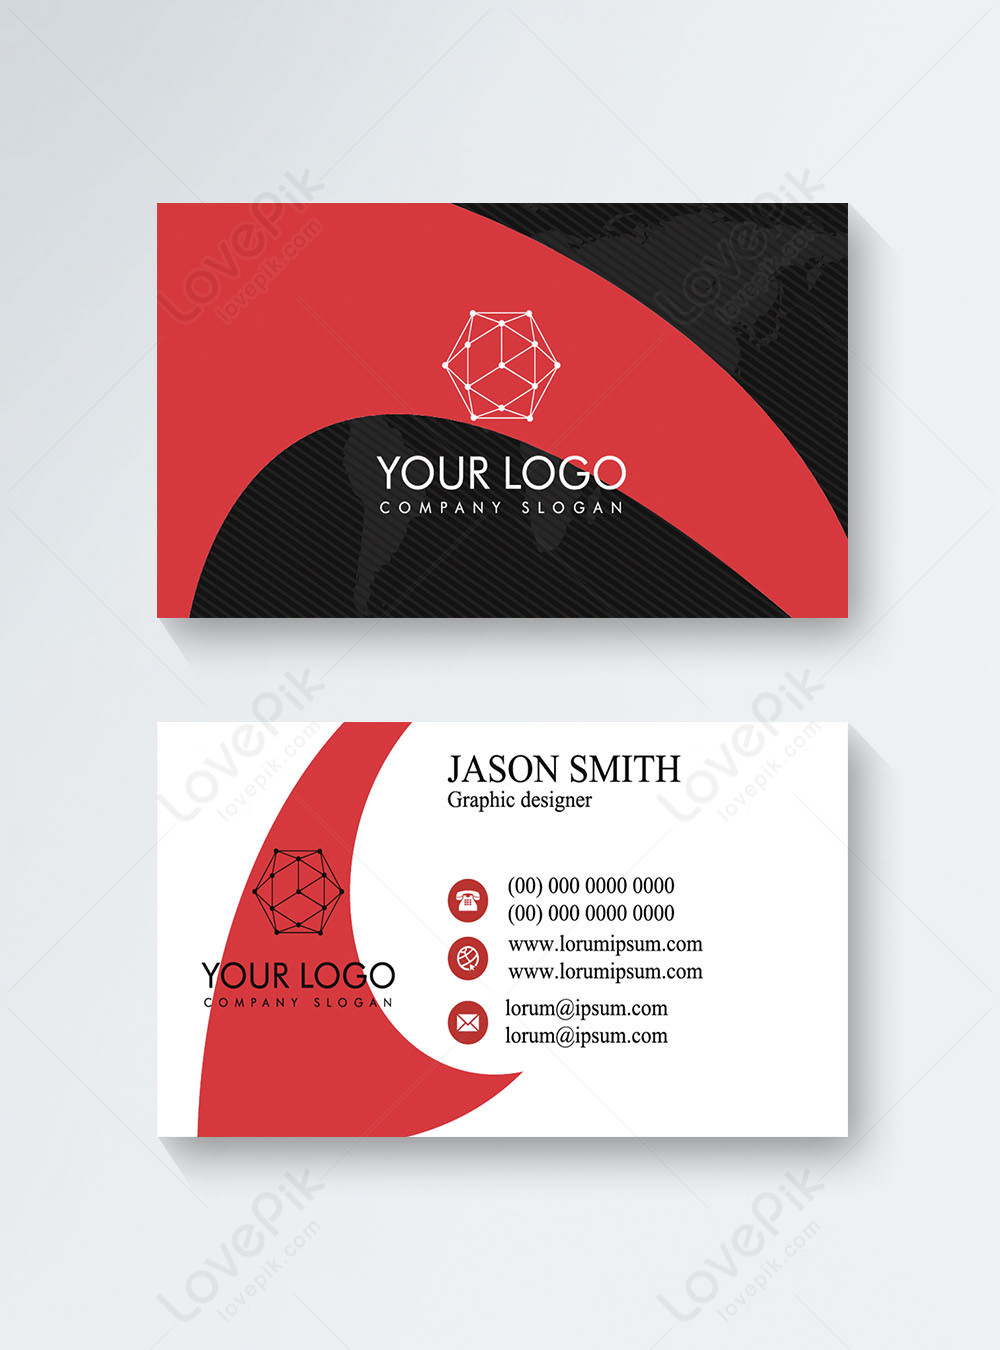 creative-business-card-template-image-picture-free-download-450113412